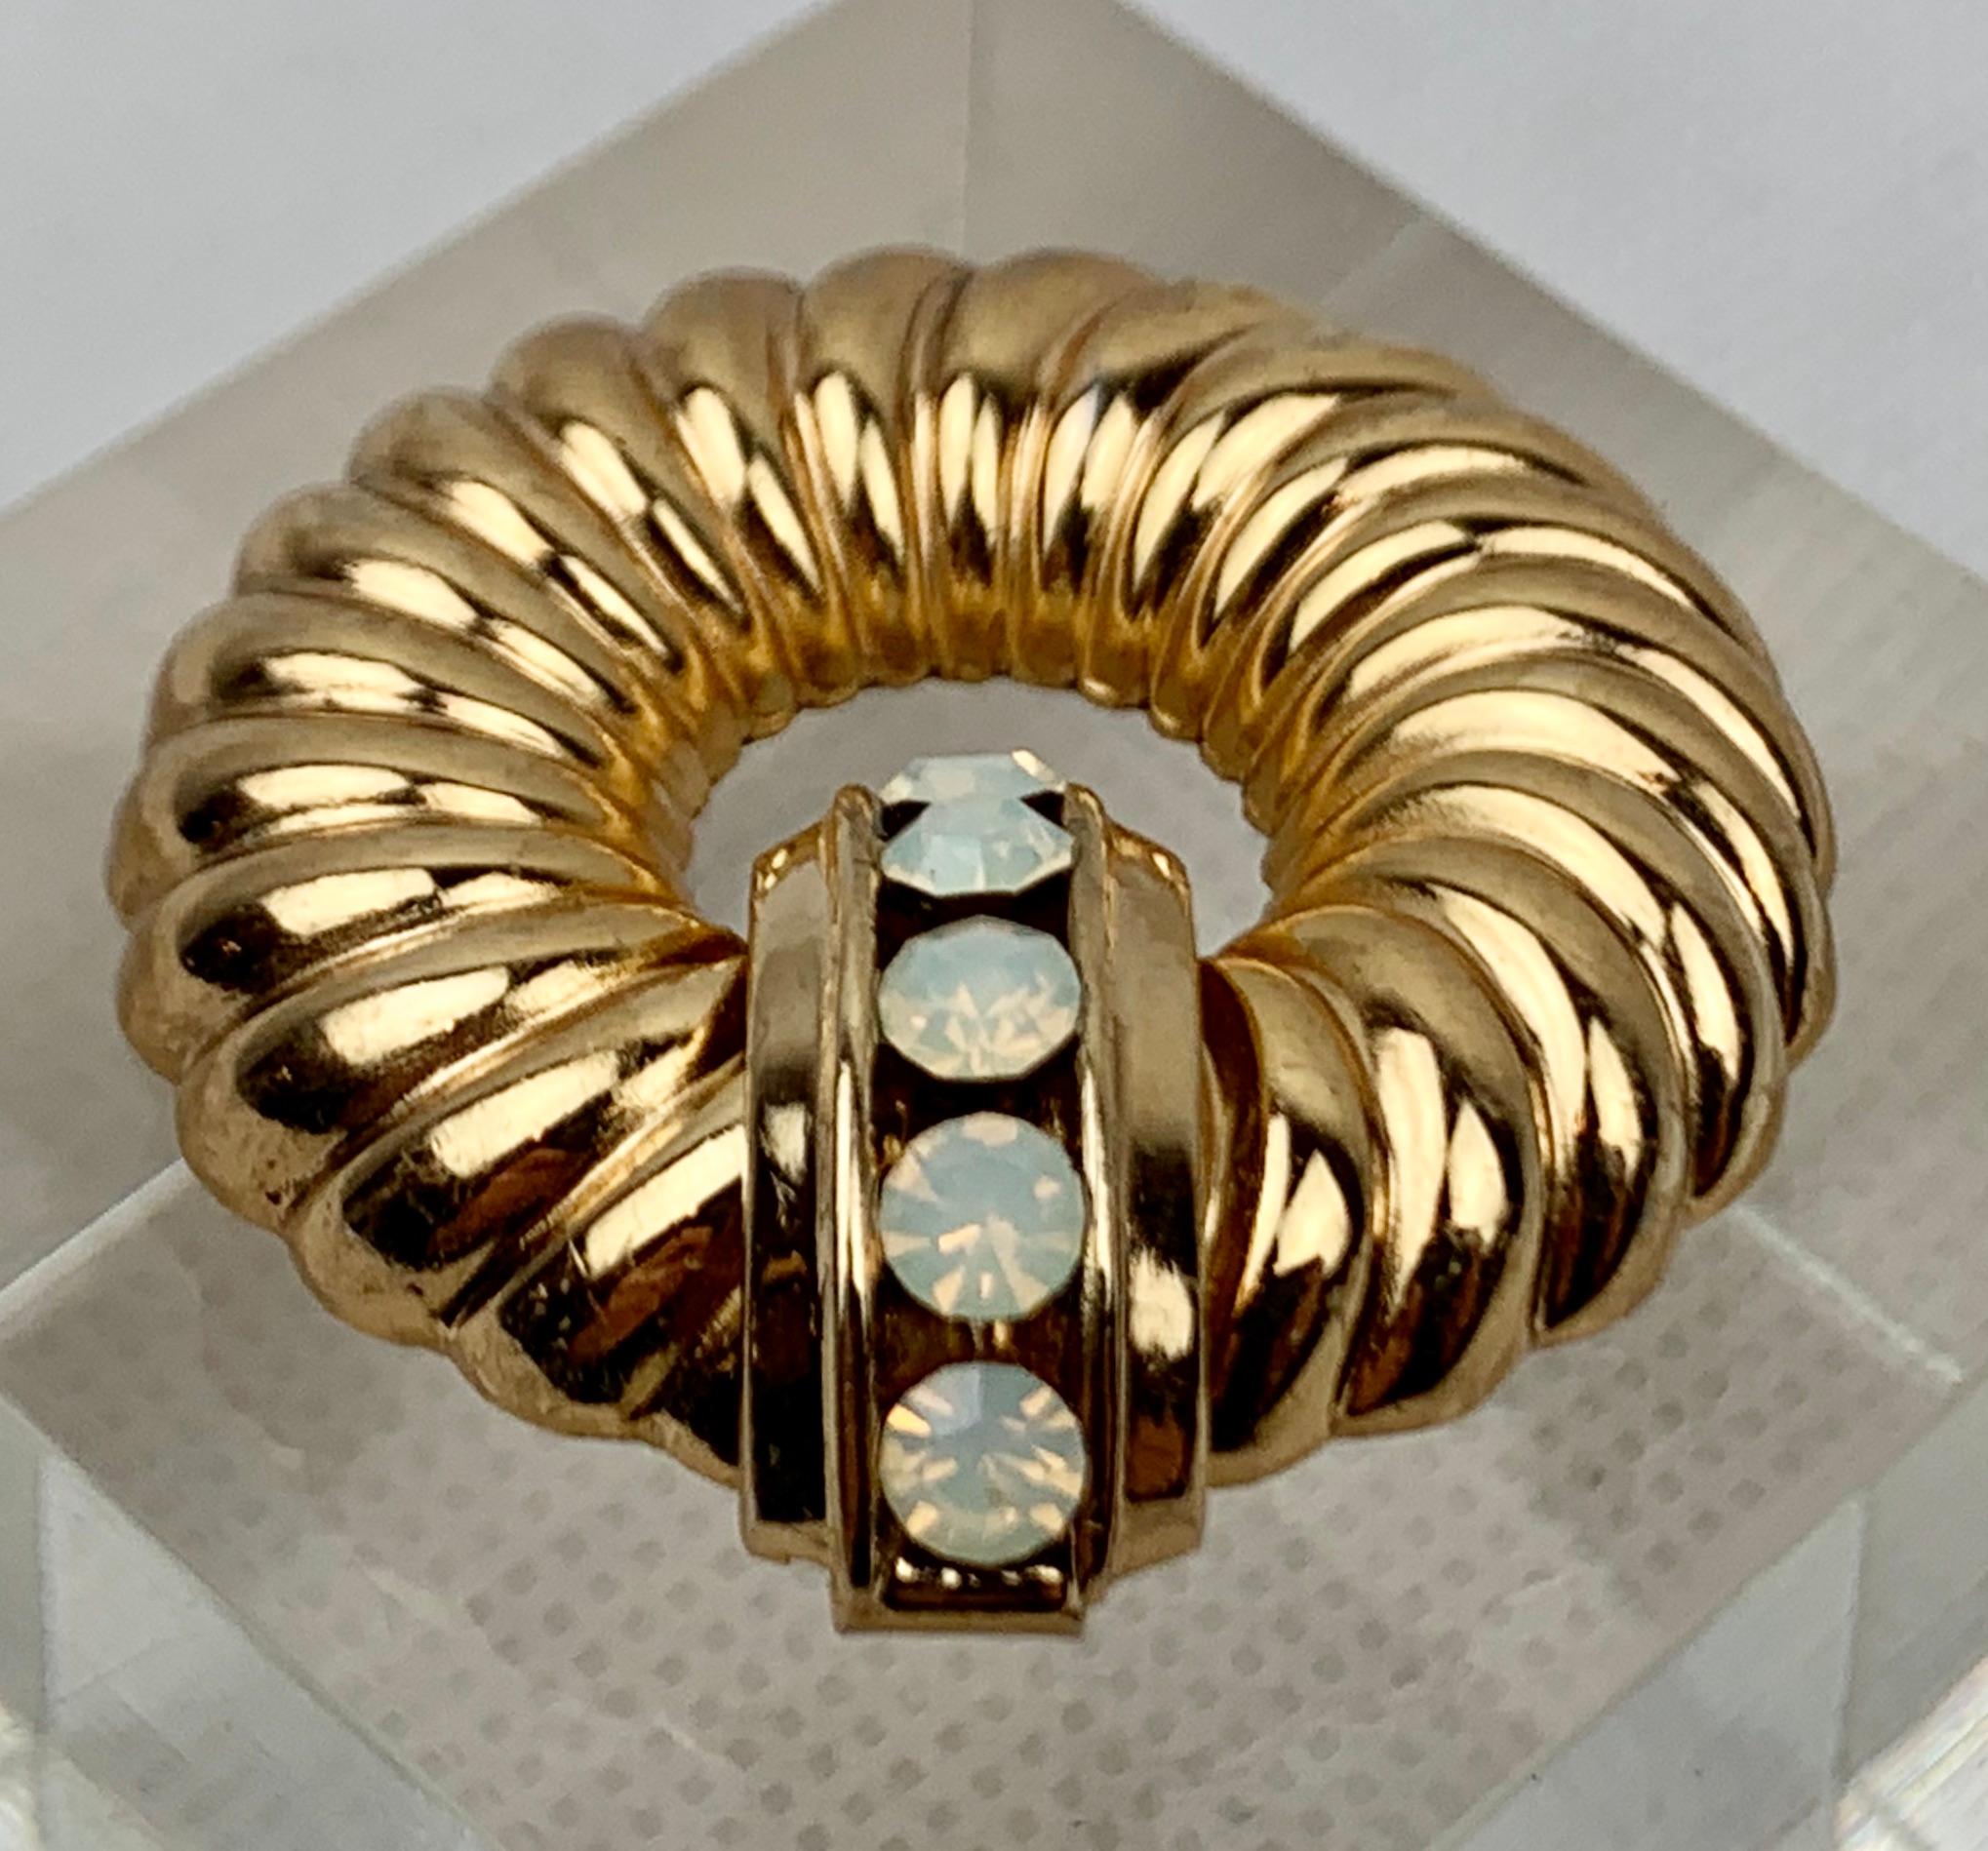 Women's Shrimp Style Gold Filled Brooch by CORO, circa 1940s